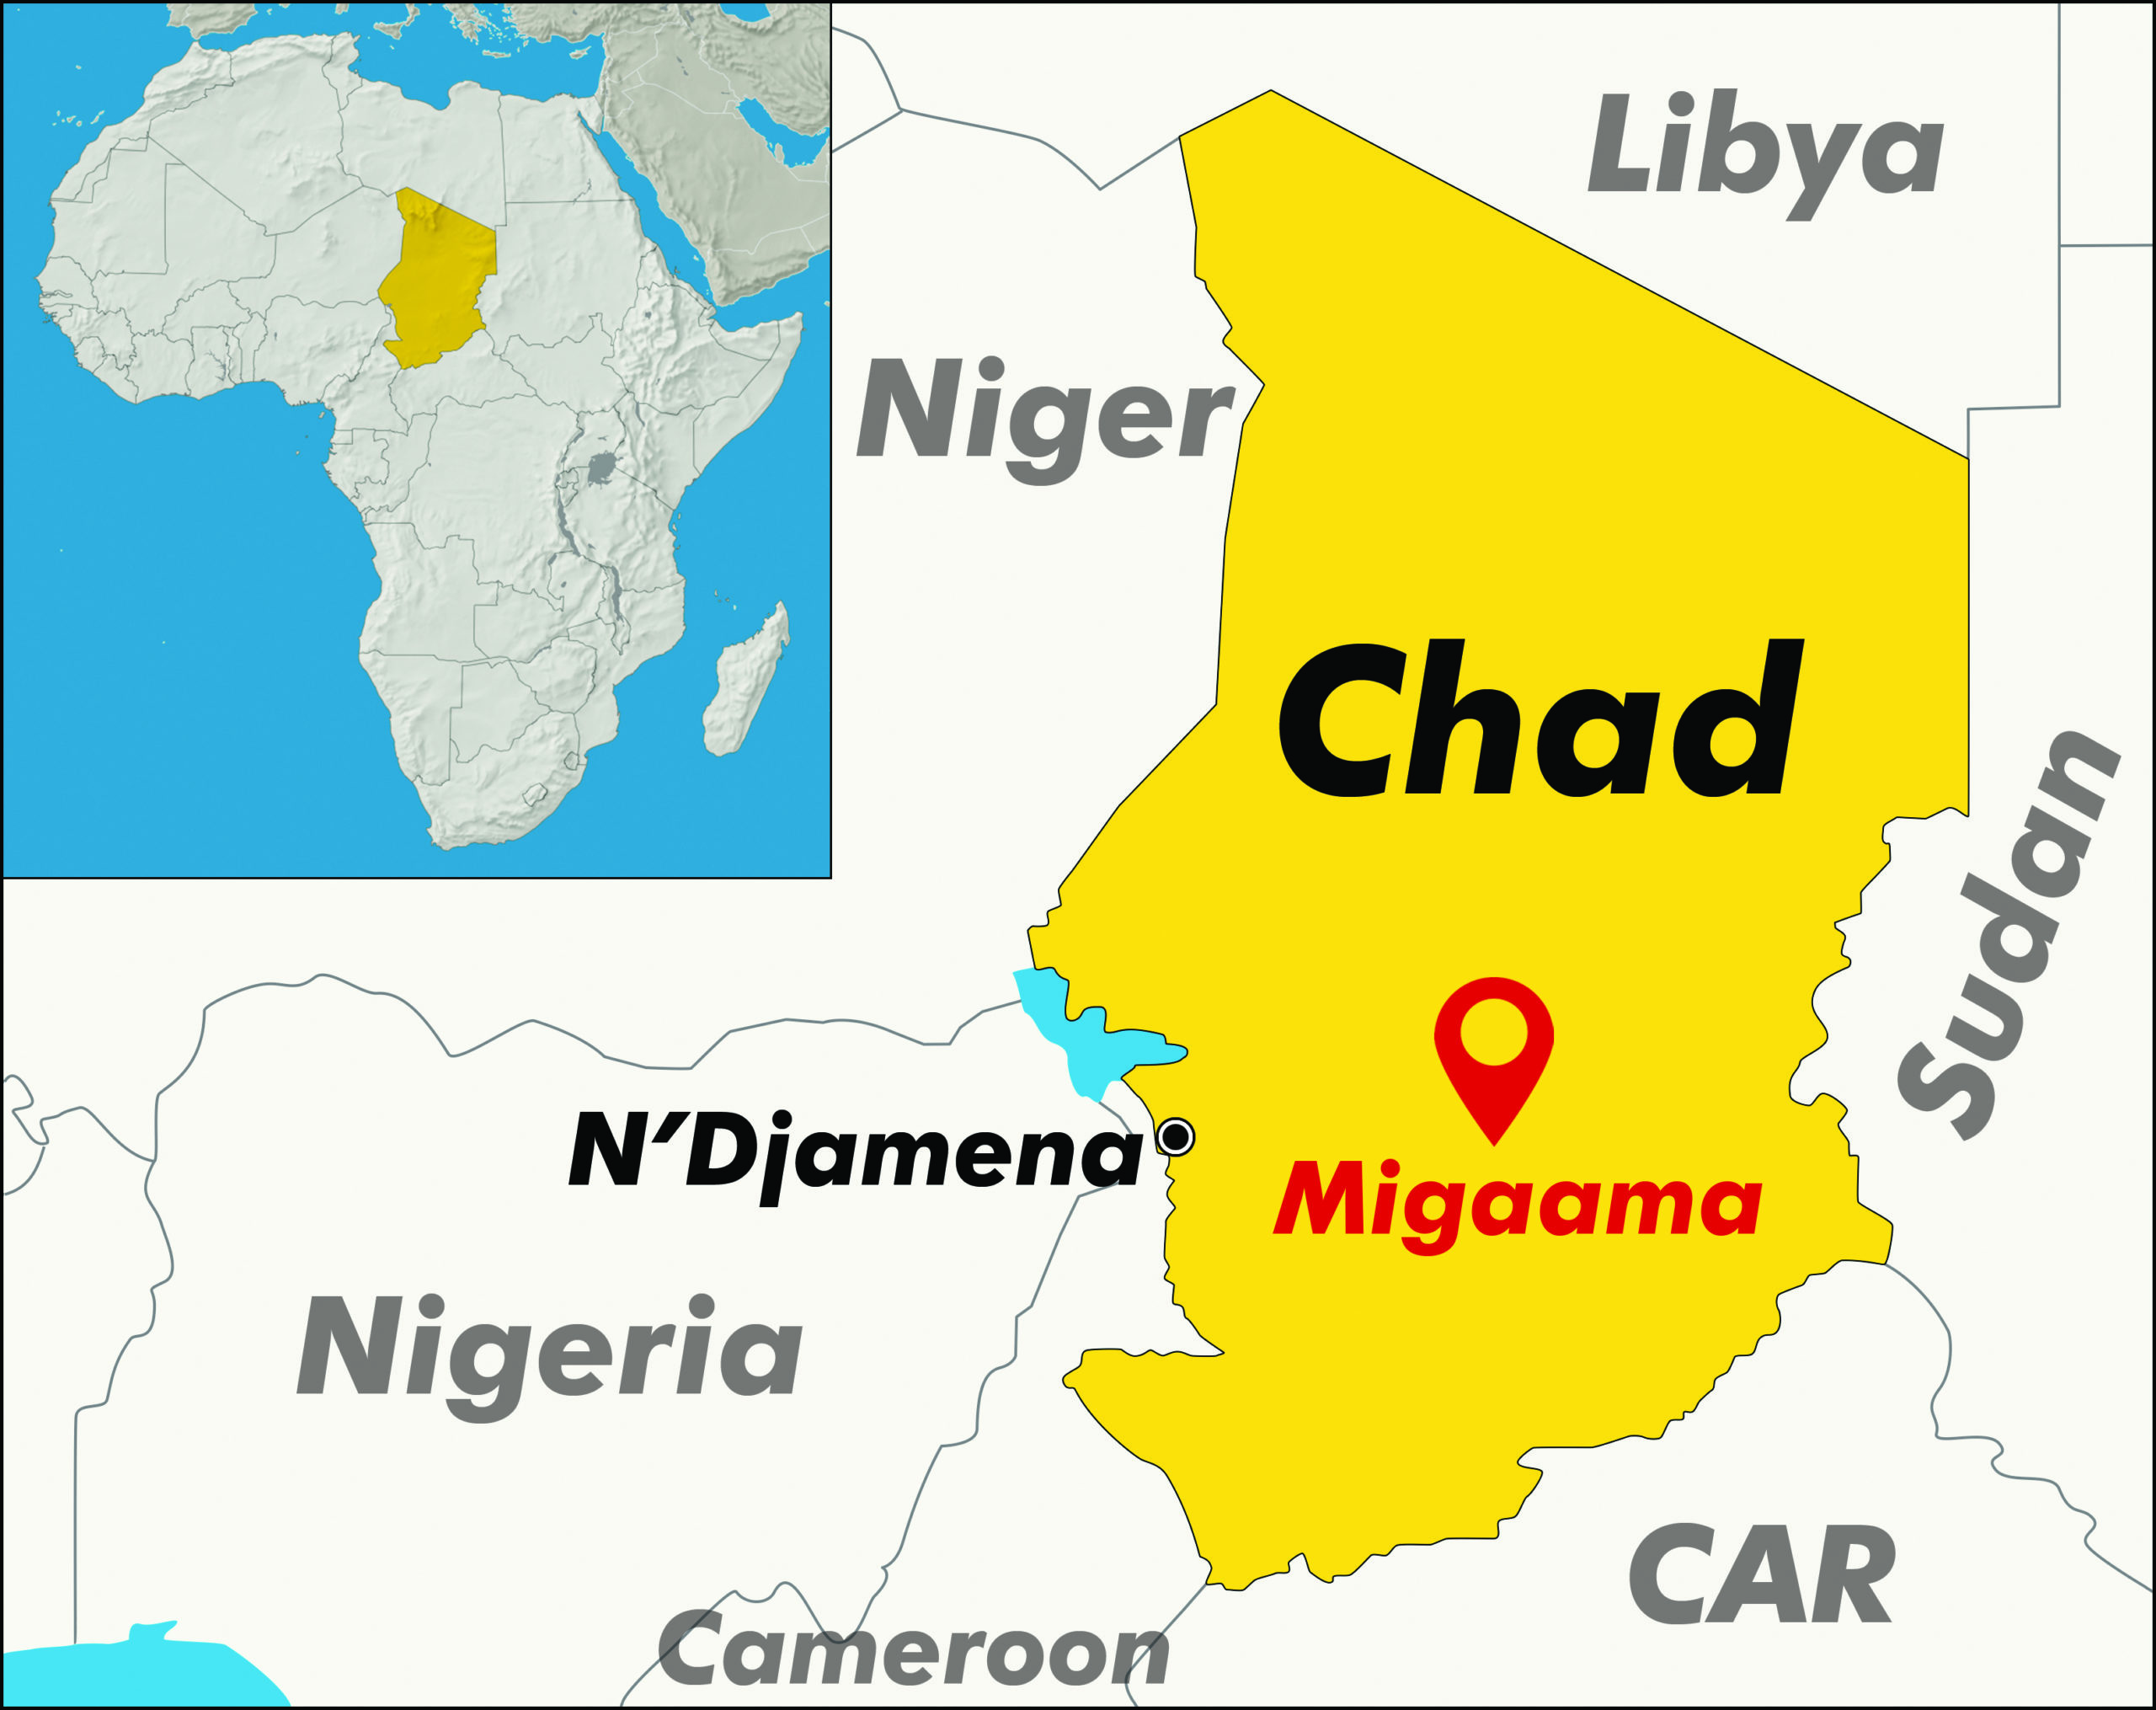 A map of Chad showing the area where Migaama is spoken, towards the south of the country